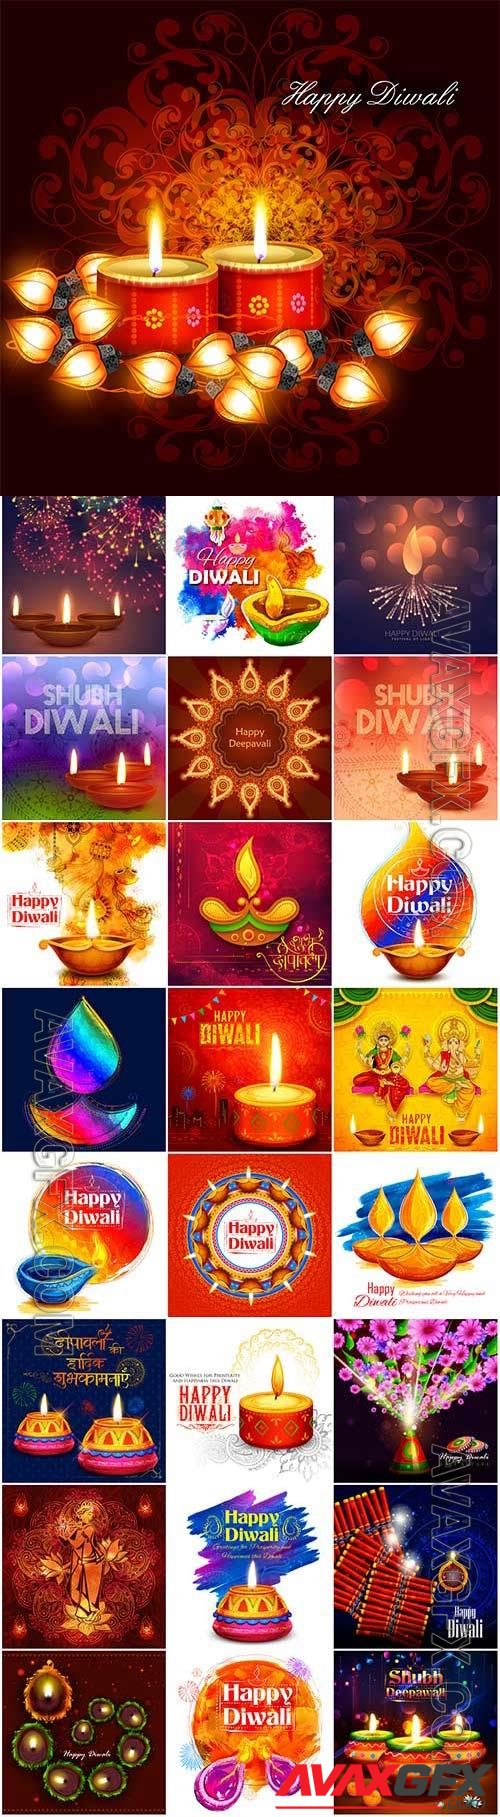 Diwali bright and colorful illustration in vector